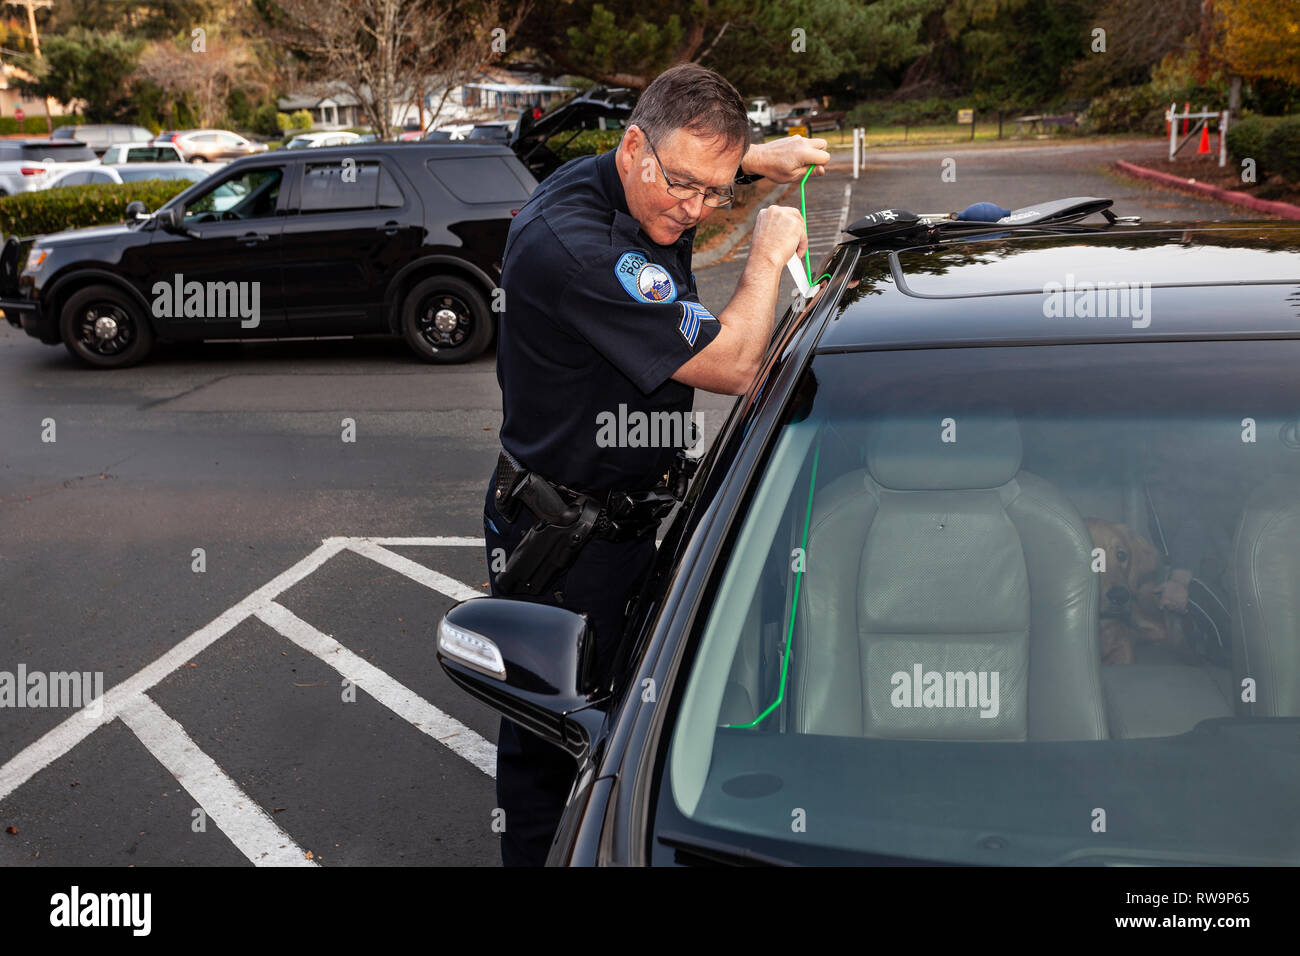 PE00374-00...WASHINGTON - Sergeant Robert Barker of the Edmonds Police Department helps to open a locked car with the keys inside. Stock Photo